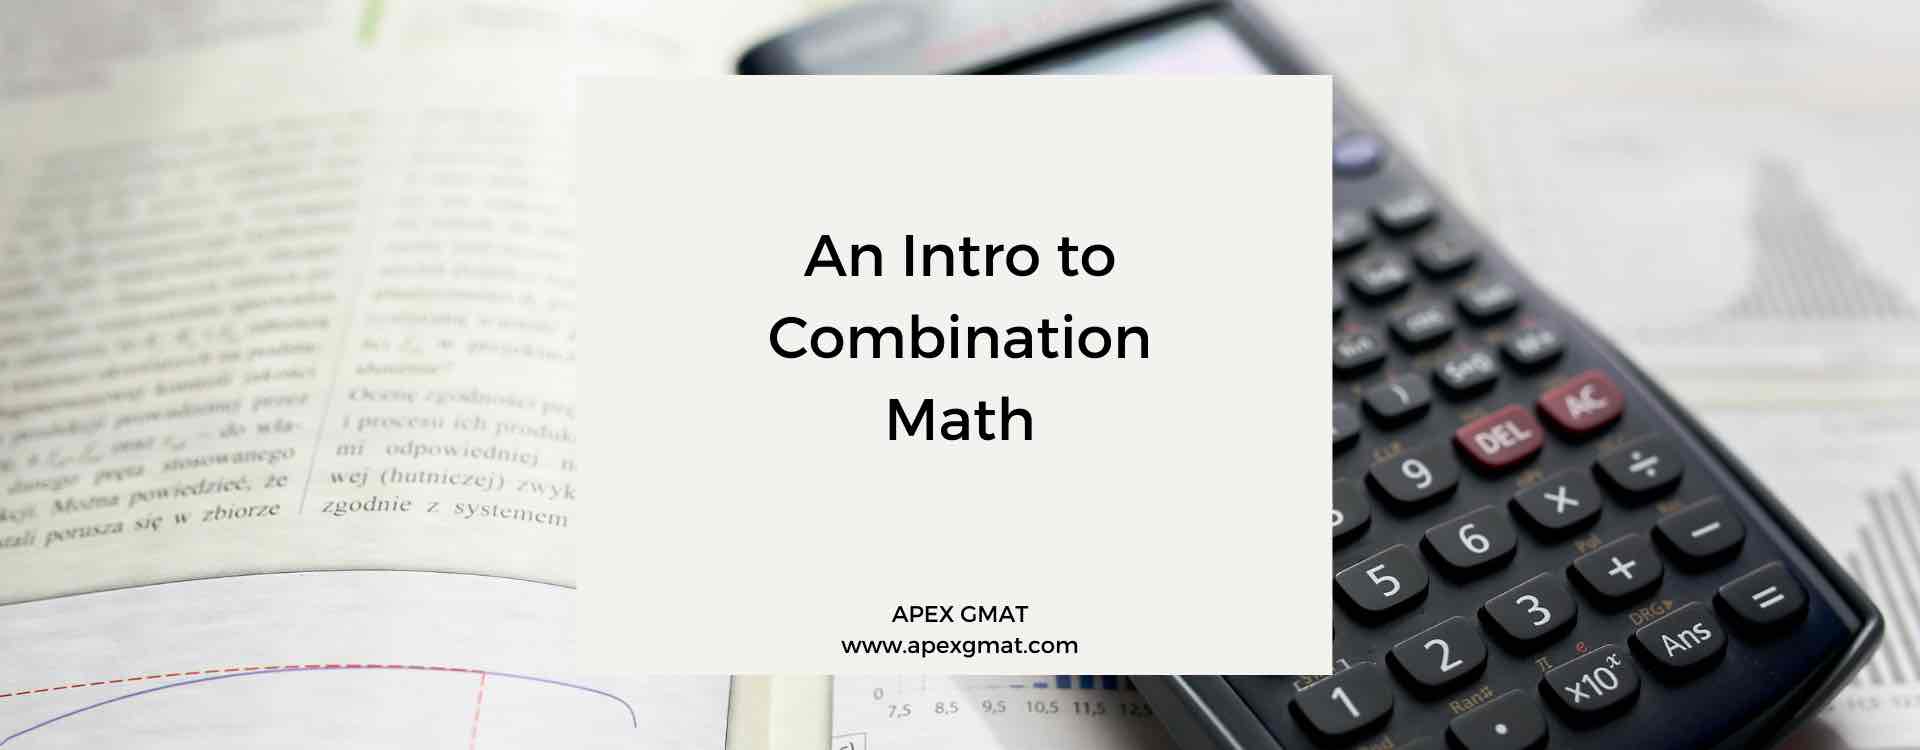 An Intro to Combination Math